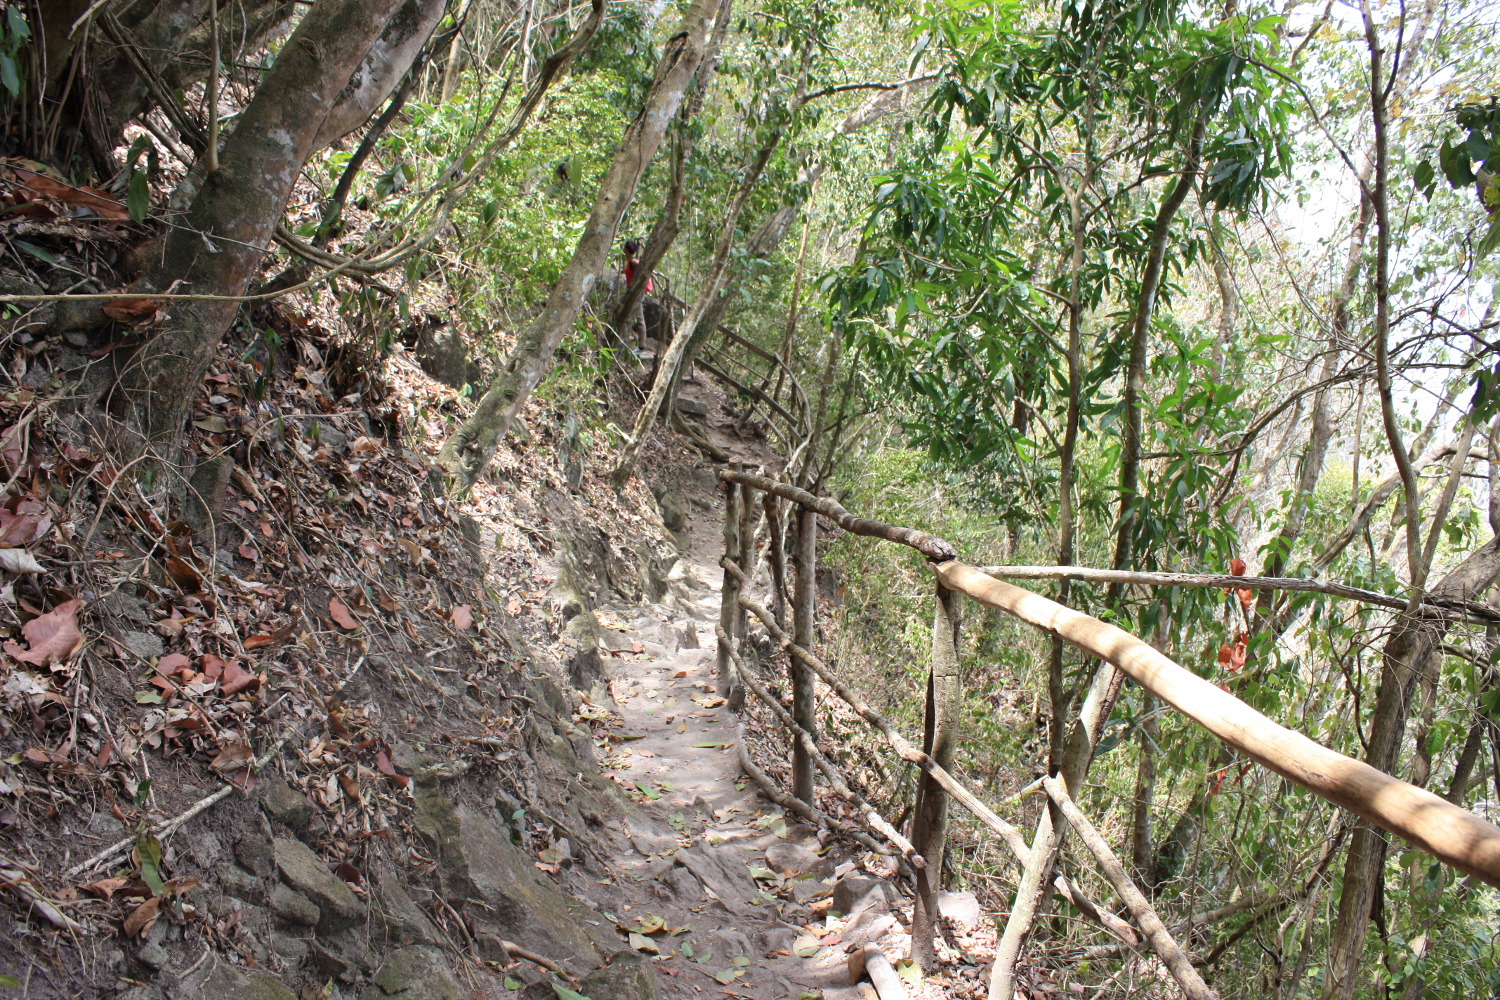 Steep inclines and make-shift paths are all part of the fun of a Piton climb (yes, fun). Image by Lorna Parkes / Lonely Planet